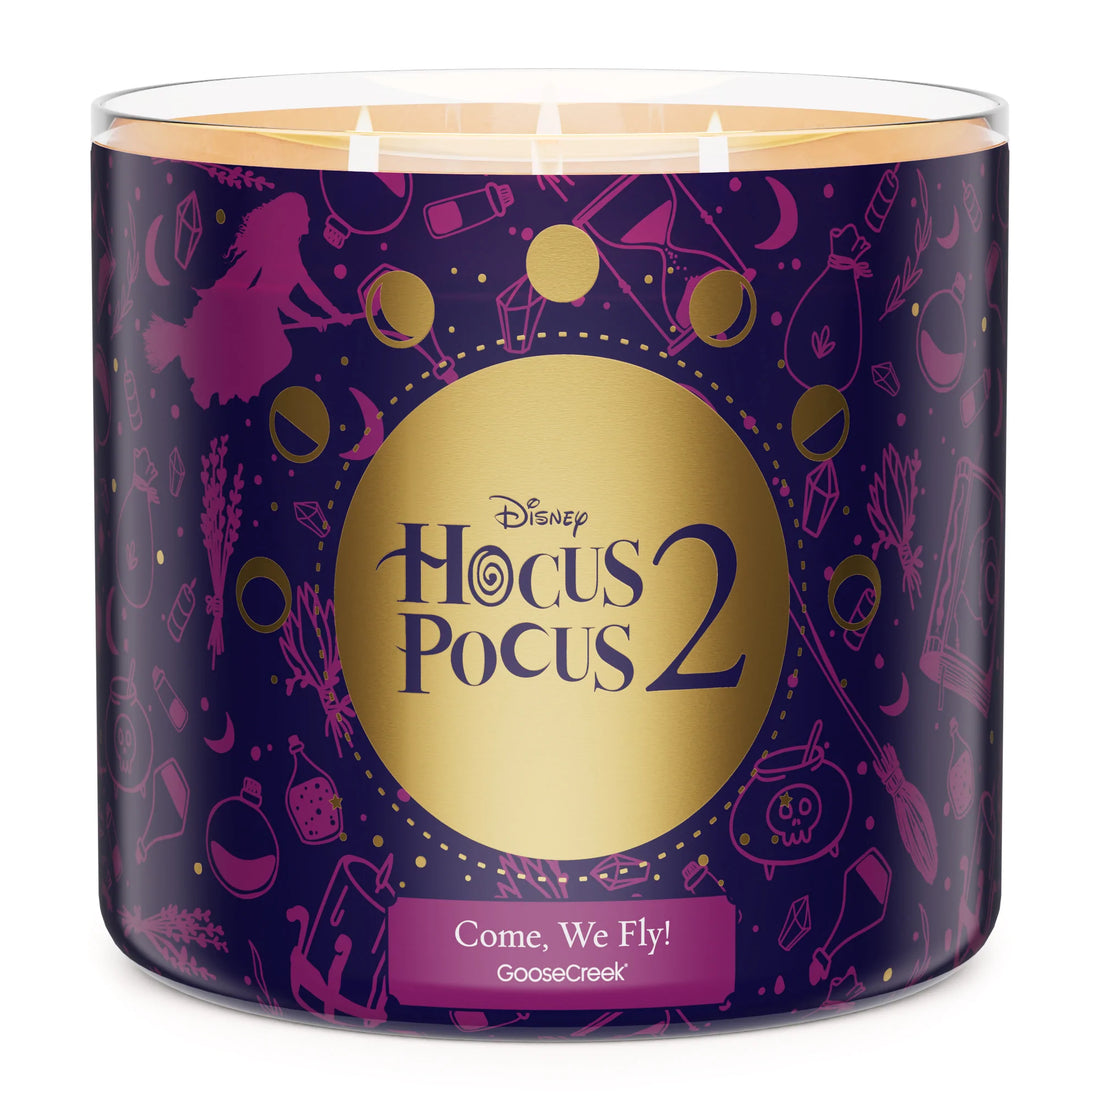 Fill Your Home With Bewitching Scents With These ‘Hocus Pocus 2’ Candles